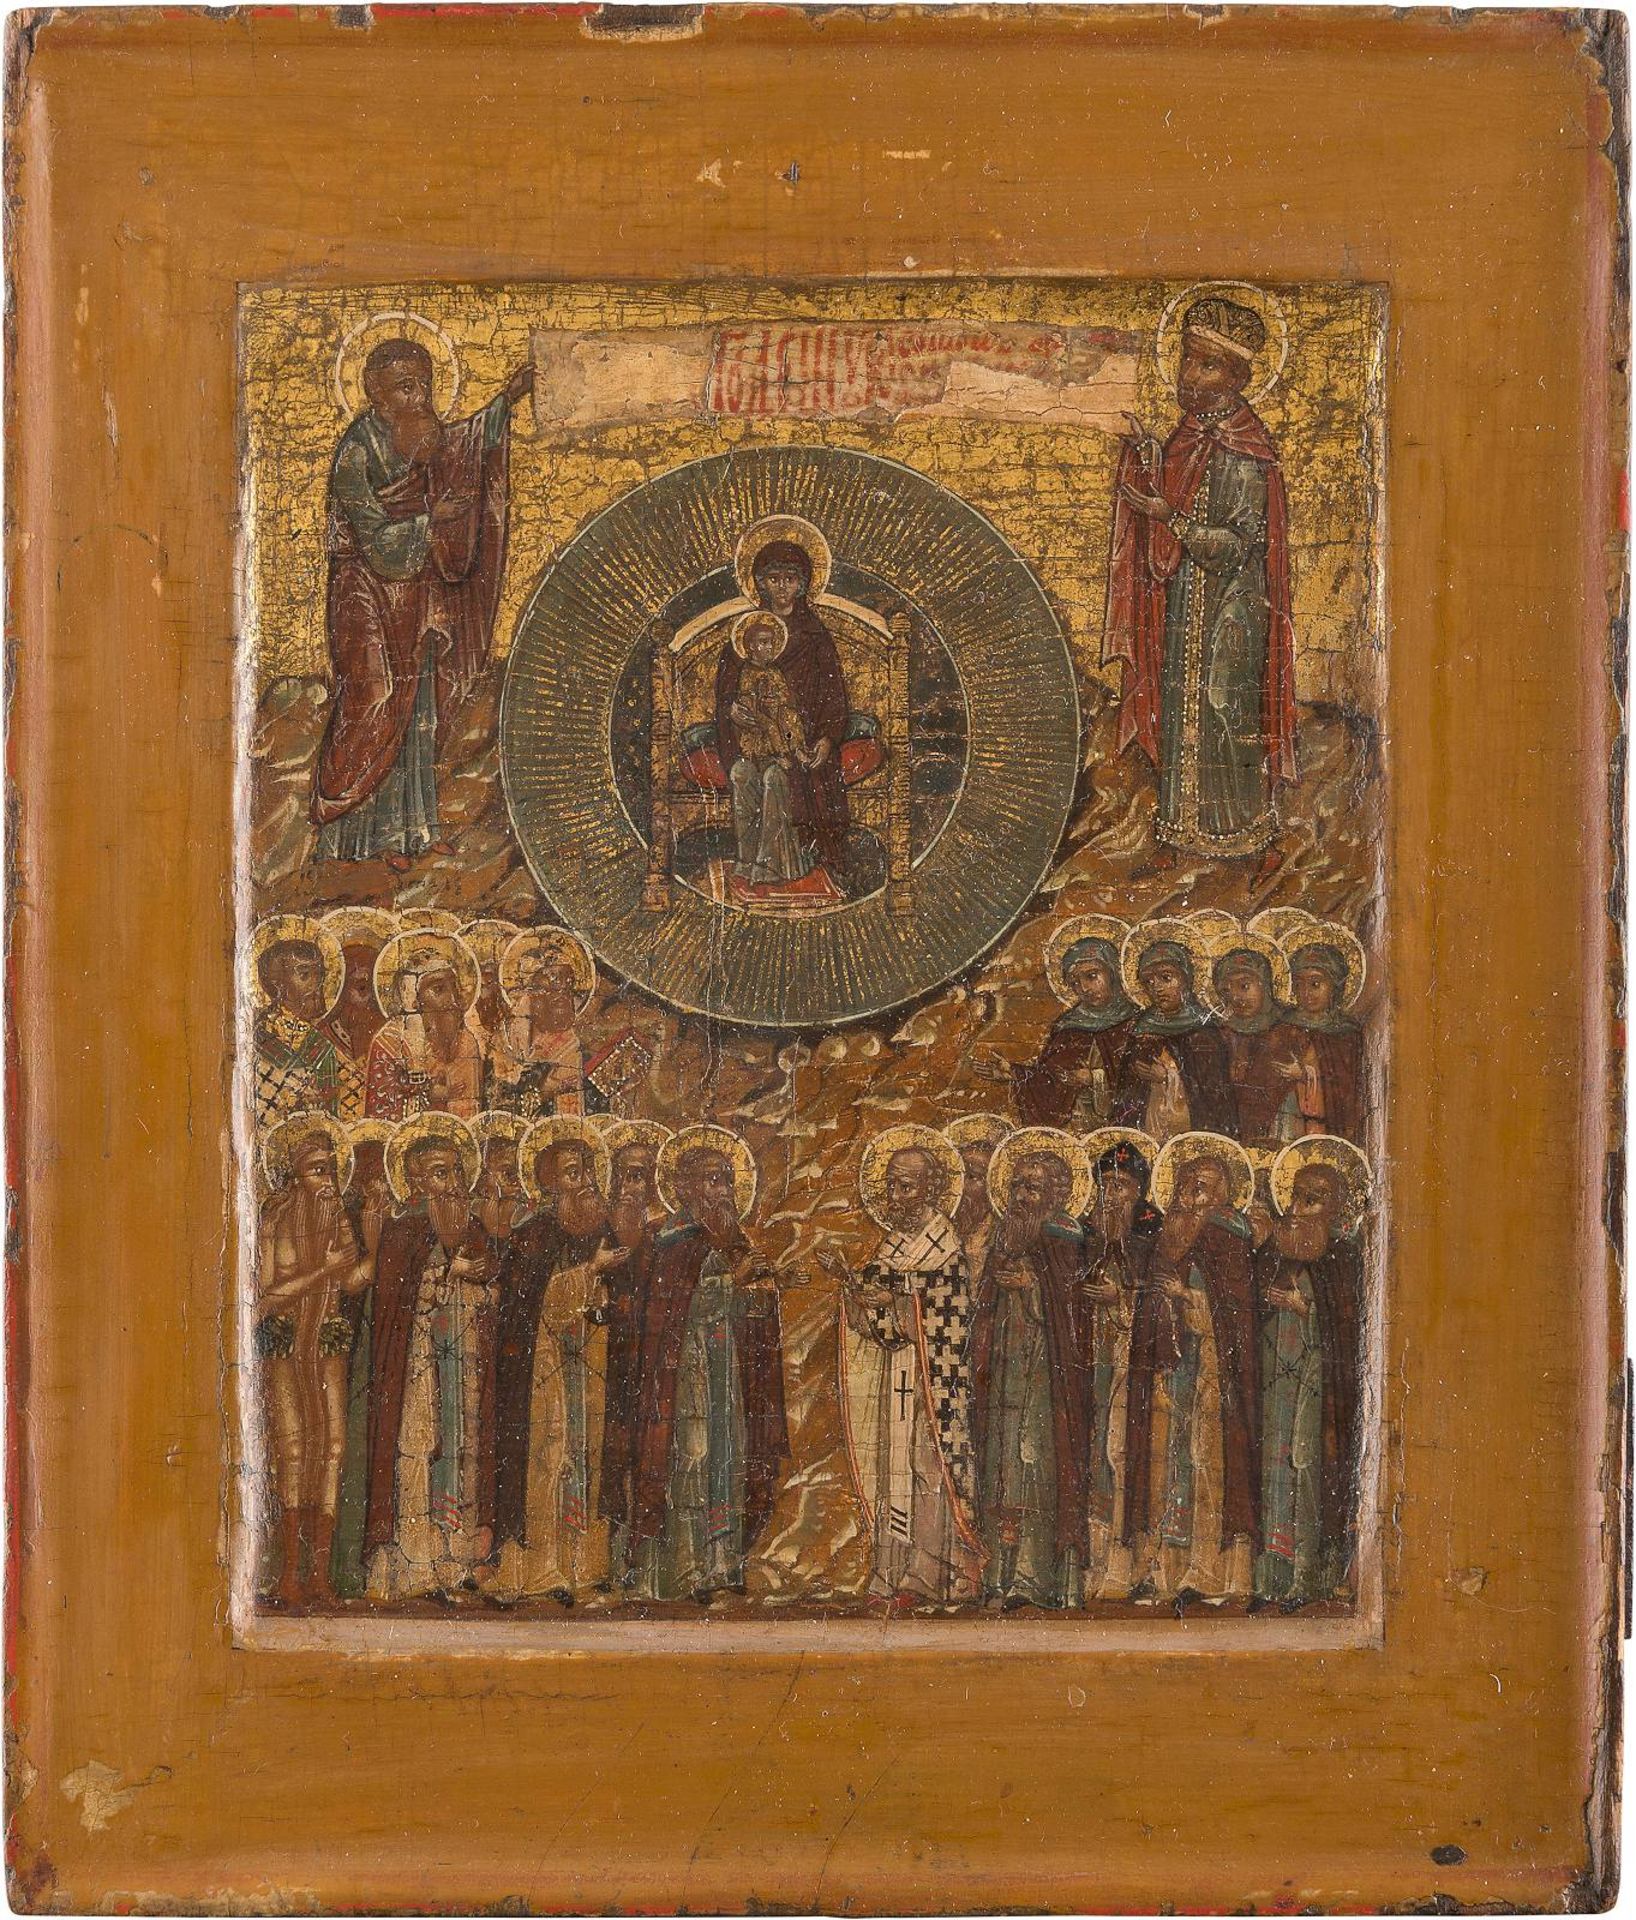 A RARE ICON SHOWING A HYMN TO THE MOTHER OF GODRussian, in the 17th century style, 19th century